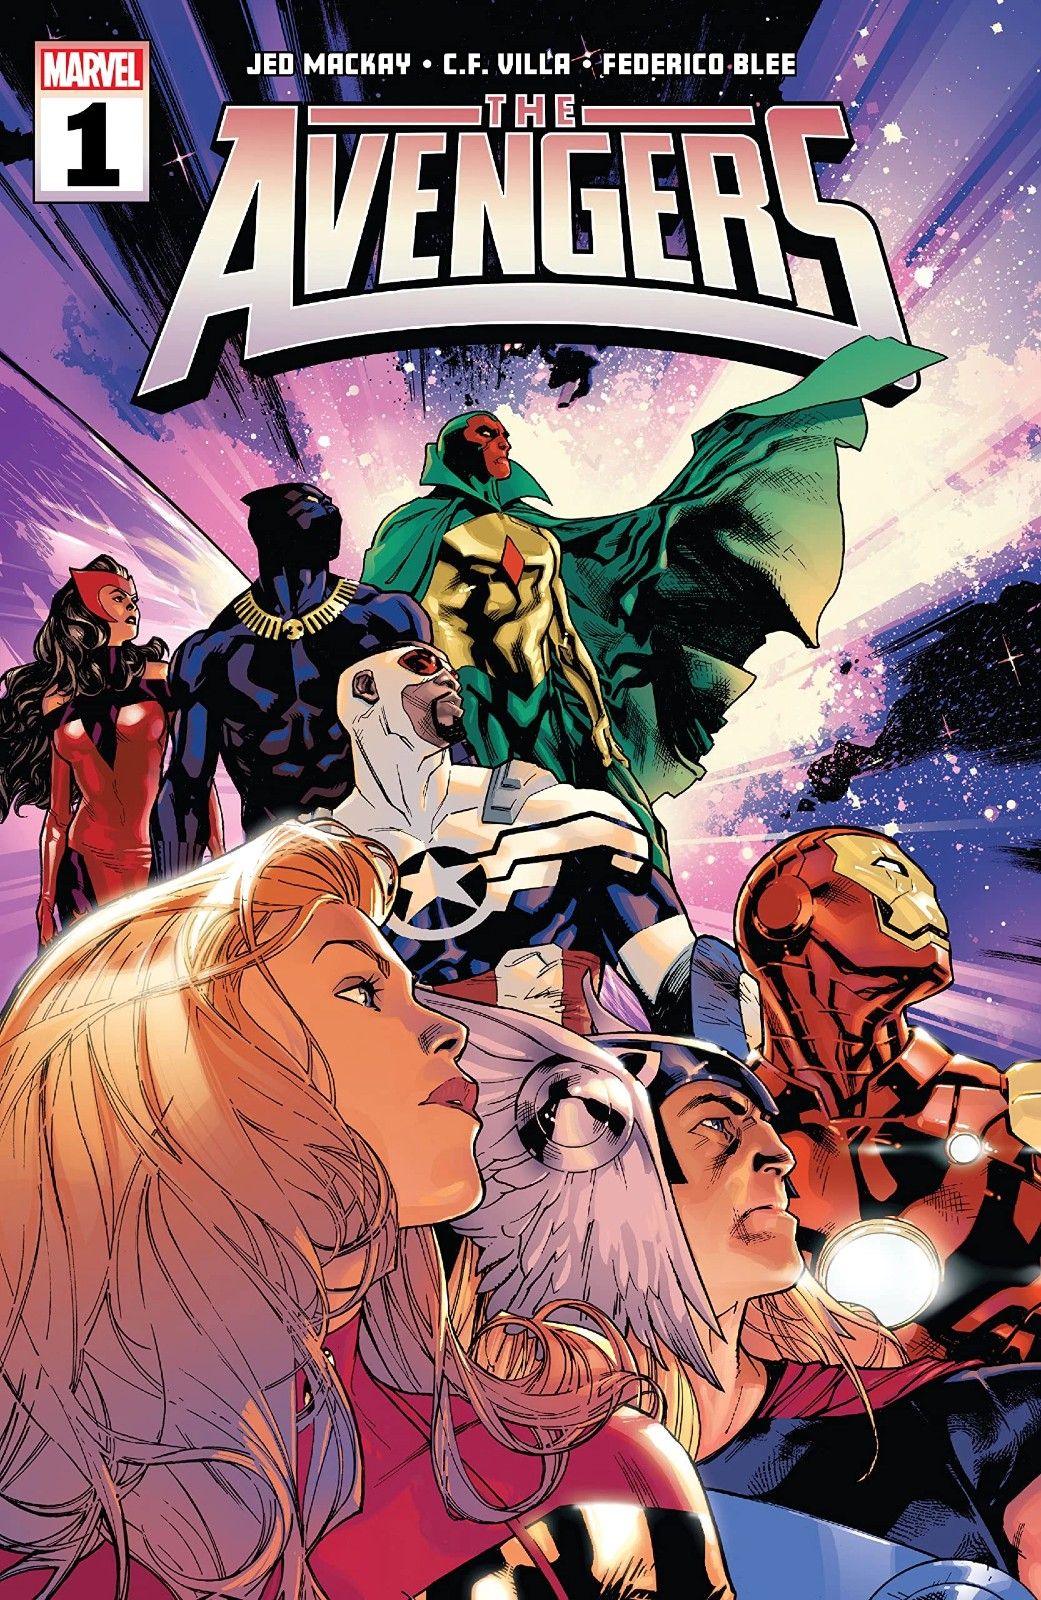 Captain Marvel, Thor, Iron Man, Vision, Black Panther, and Scarlet Witch in Avengers (Vol. 9) #1 by Marvel